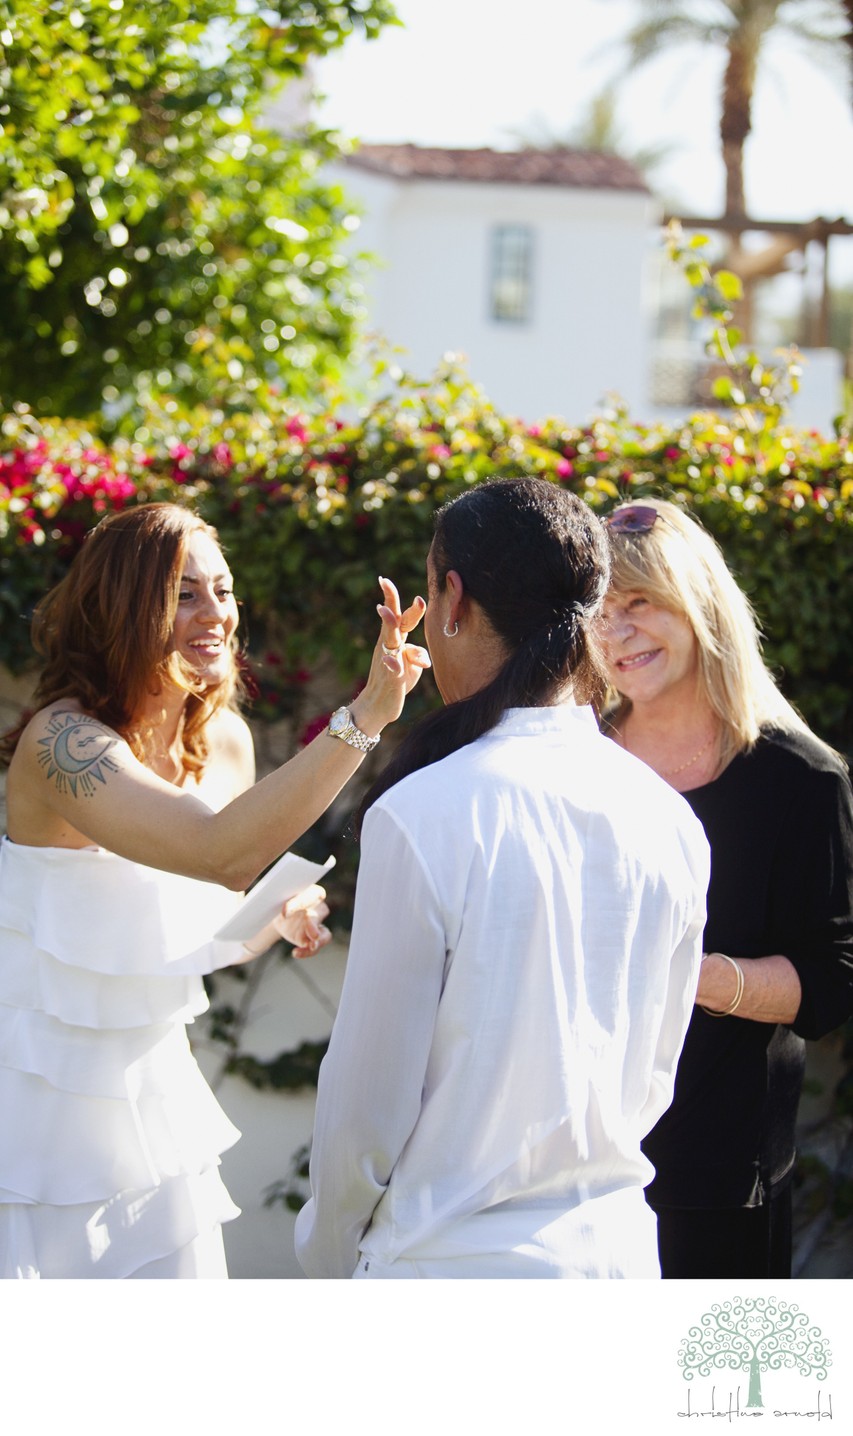 Photojournalism for Coachella Valley Elopements